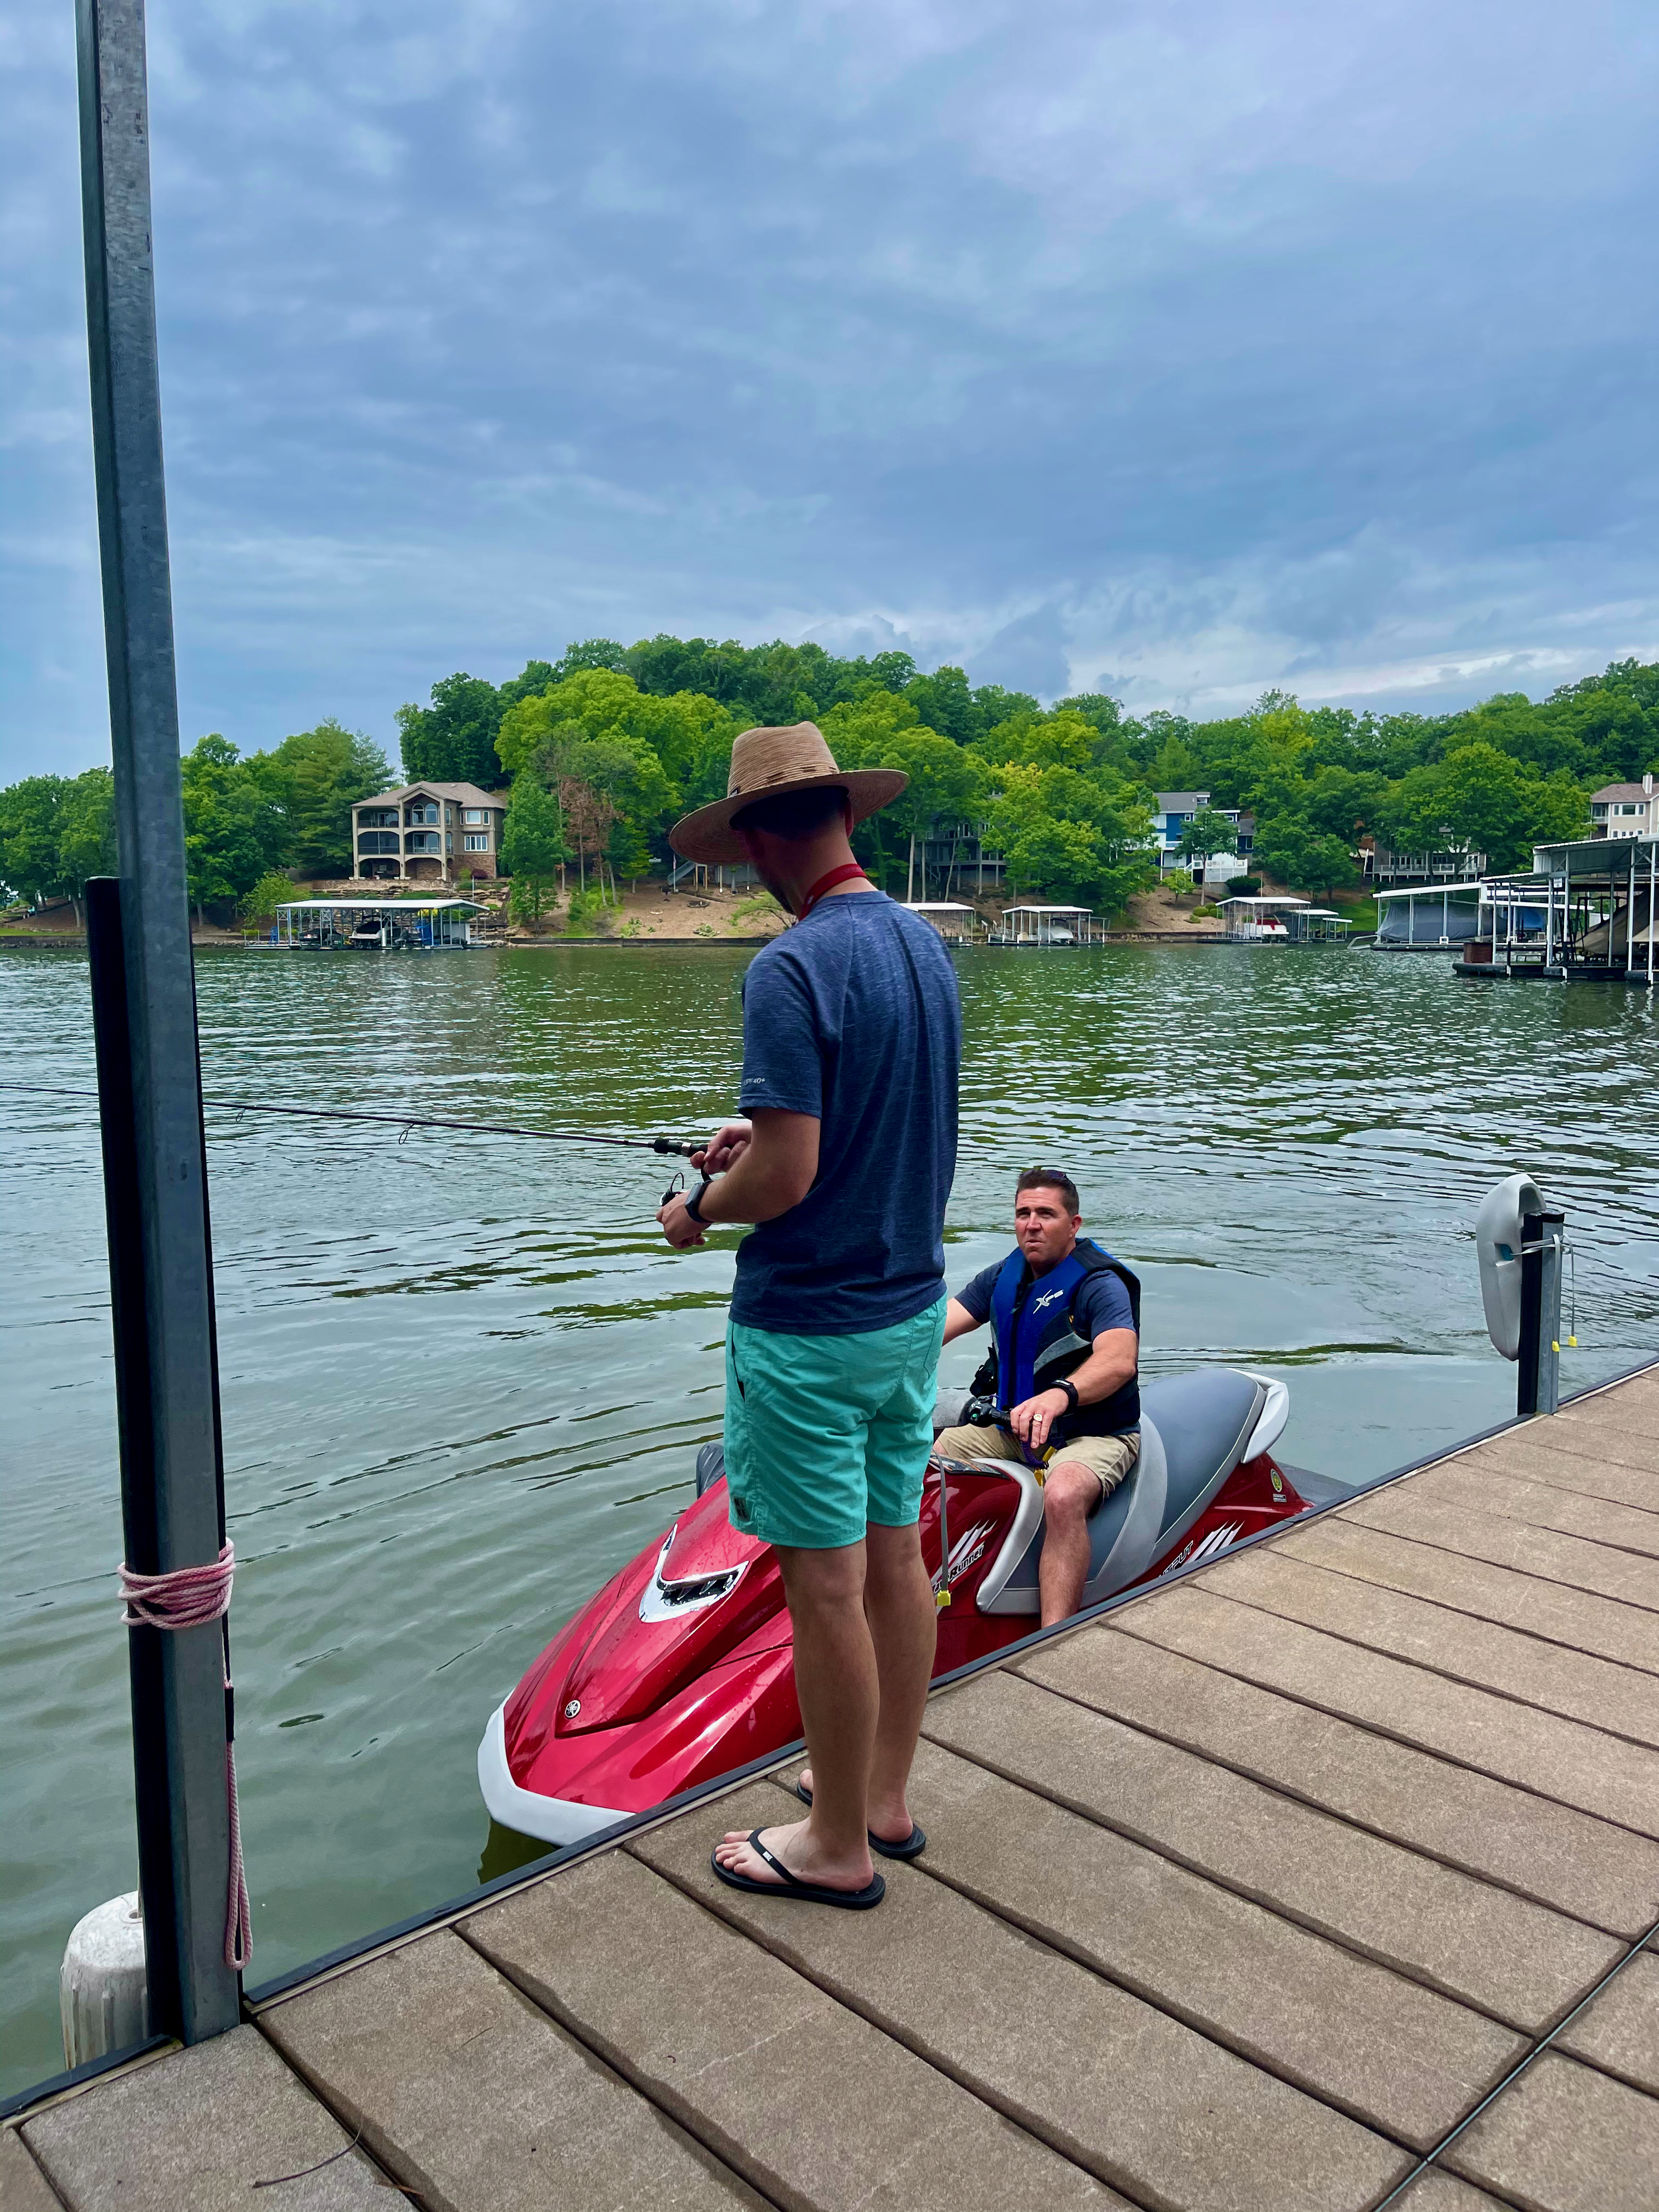 Sean attempting to fish off the dock with Steve instructing